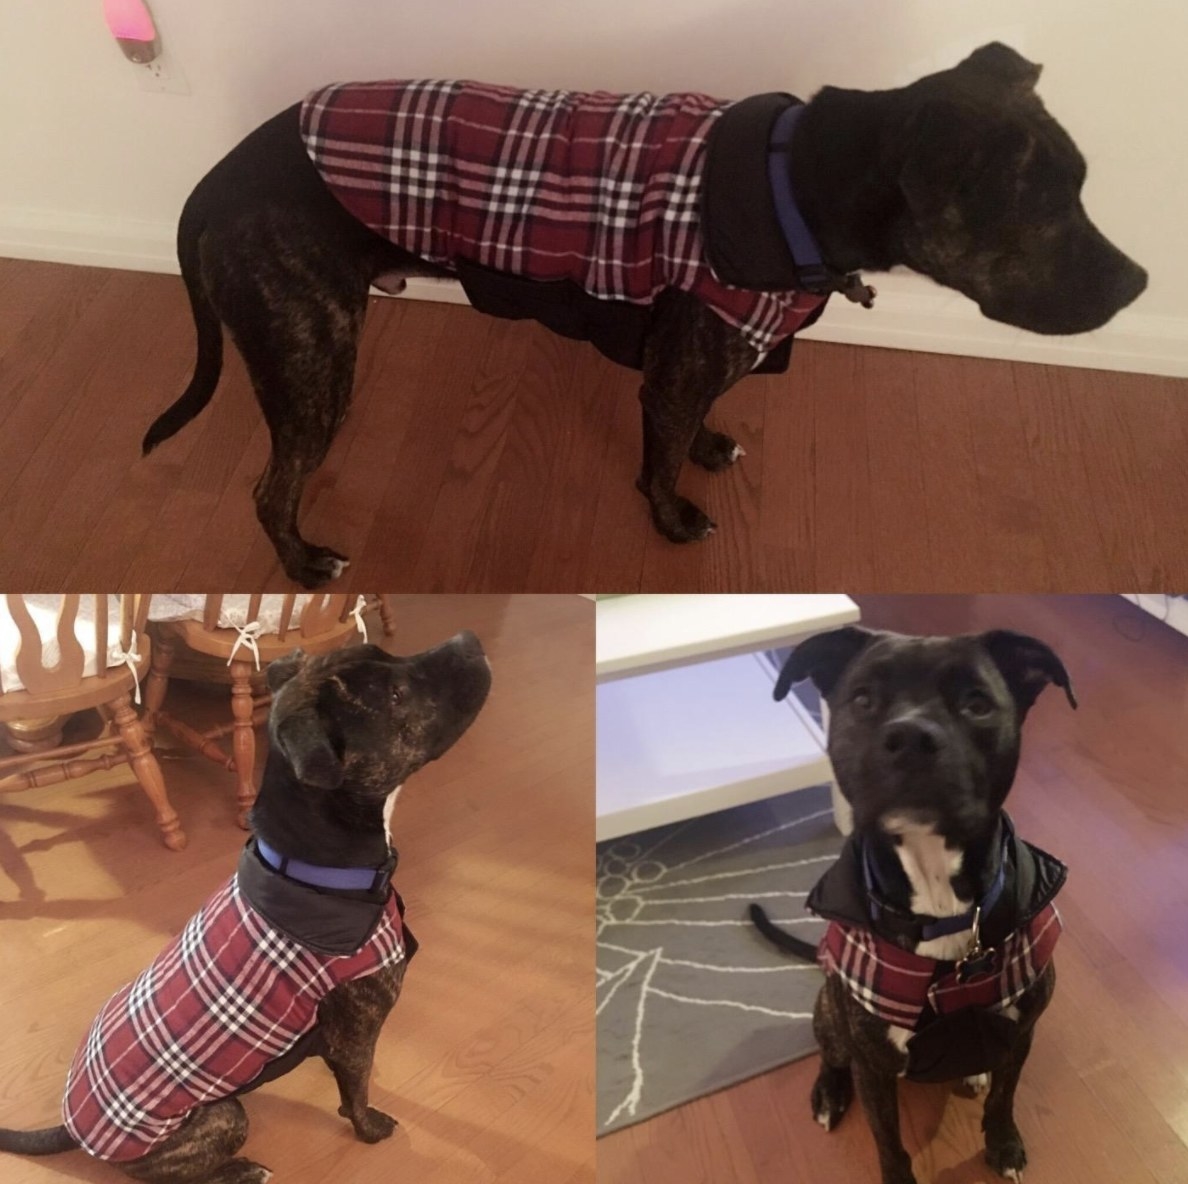 A dog wearing the coat